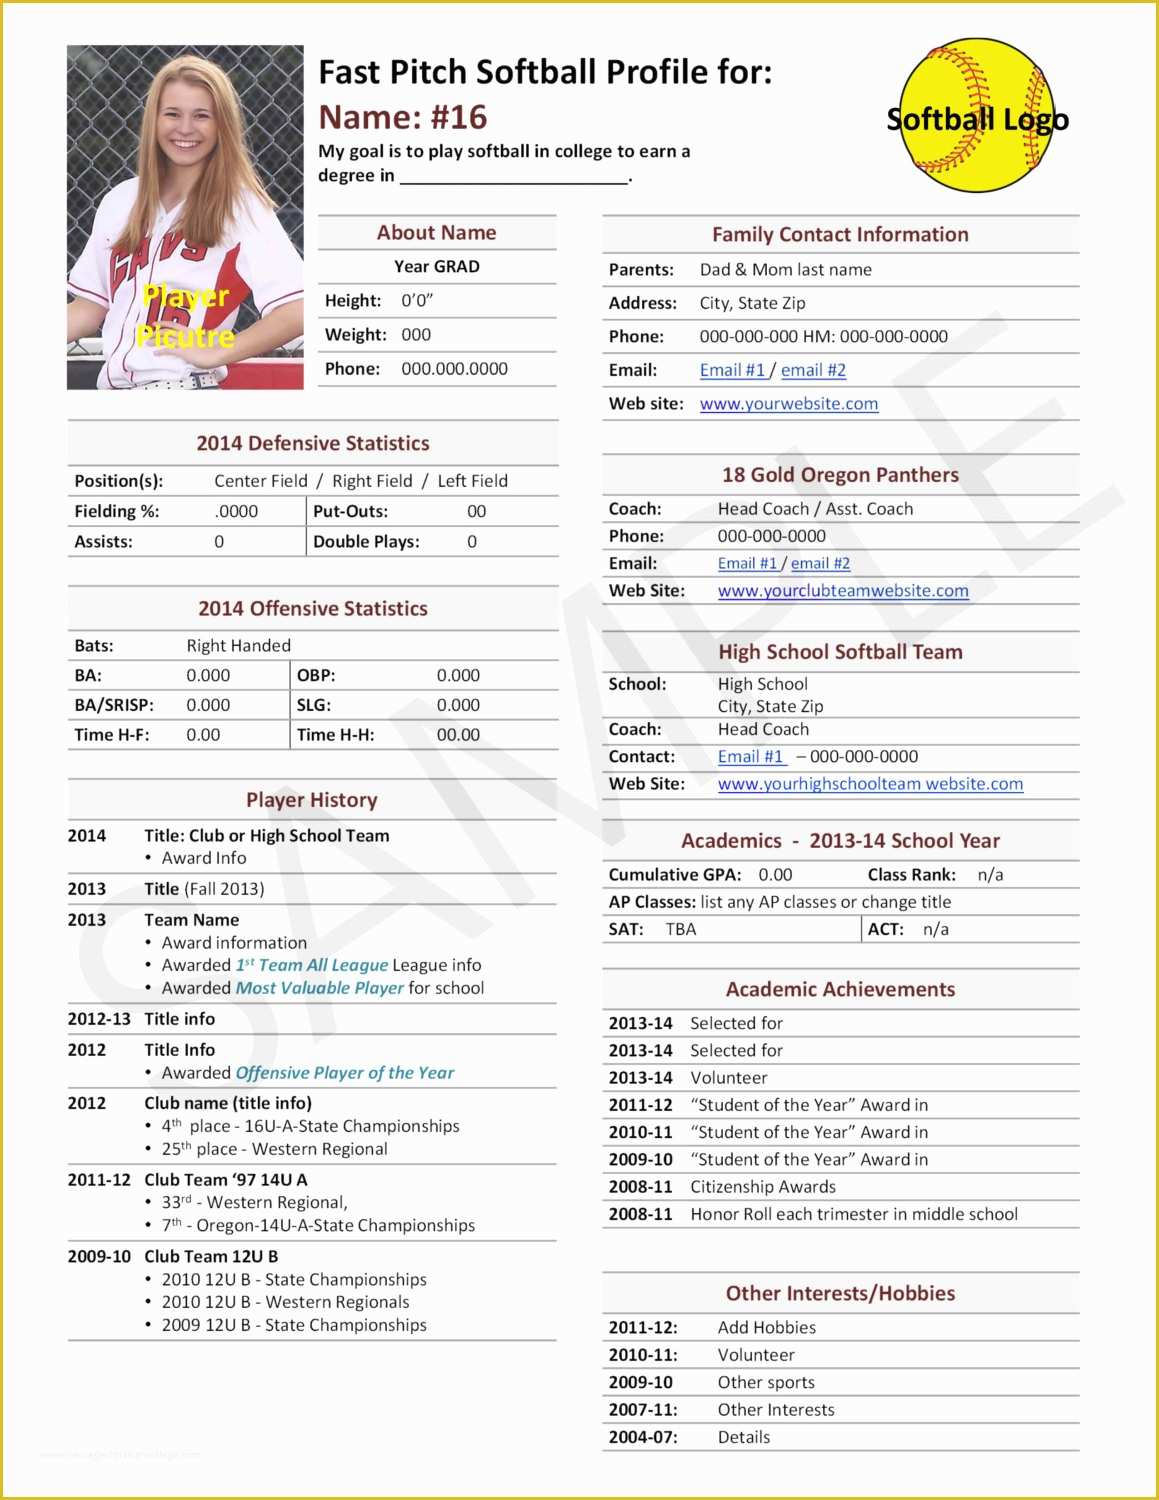 Athlete Profile Template Free Of Fast Pitch softball Player Profile Template Used for College